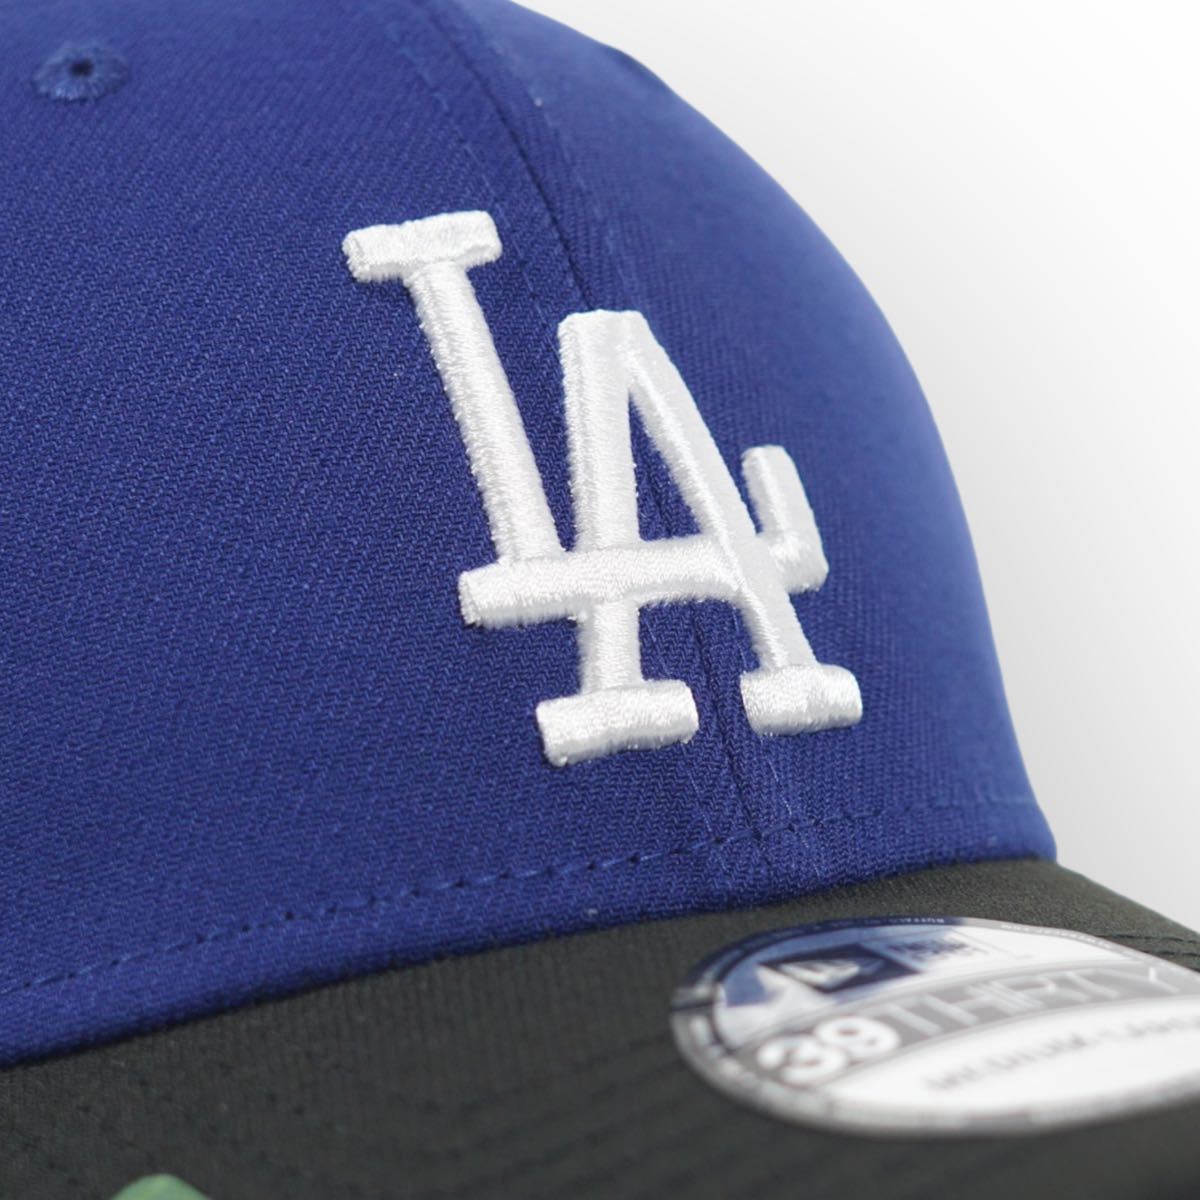 [ not yet sale in Japan ]NEWERA Los Angeles Dodgers 39THIRTY City Connect Caps M/L Los Angeles doja-s large . sho flat MLB official cap 